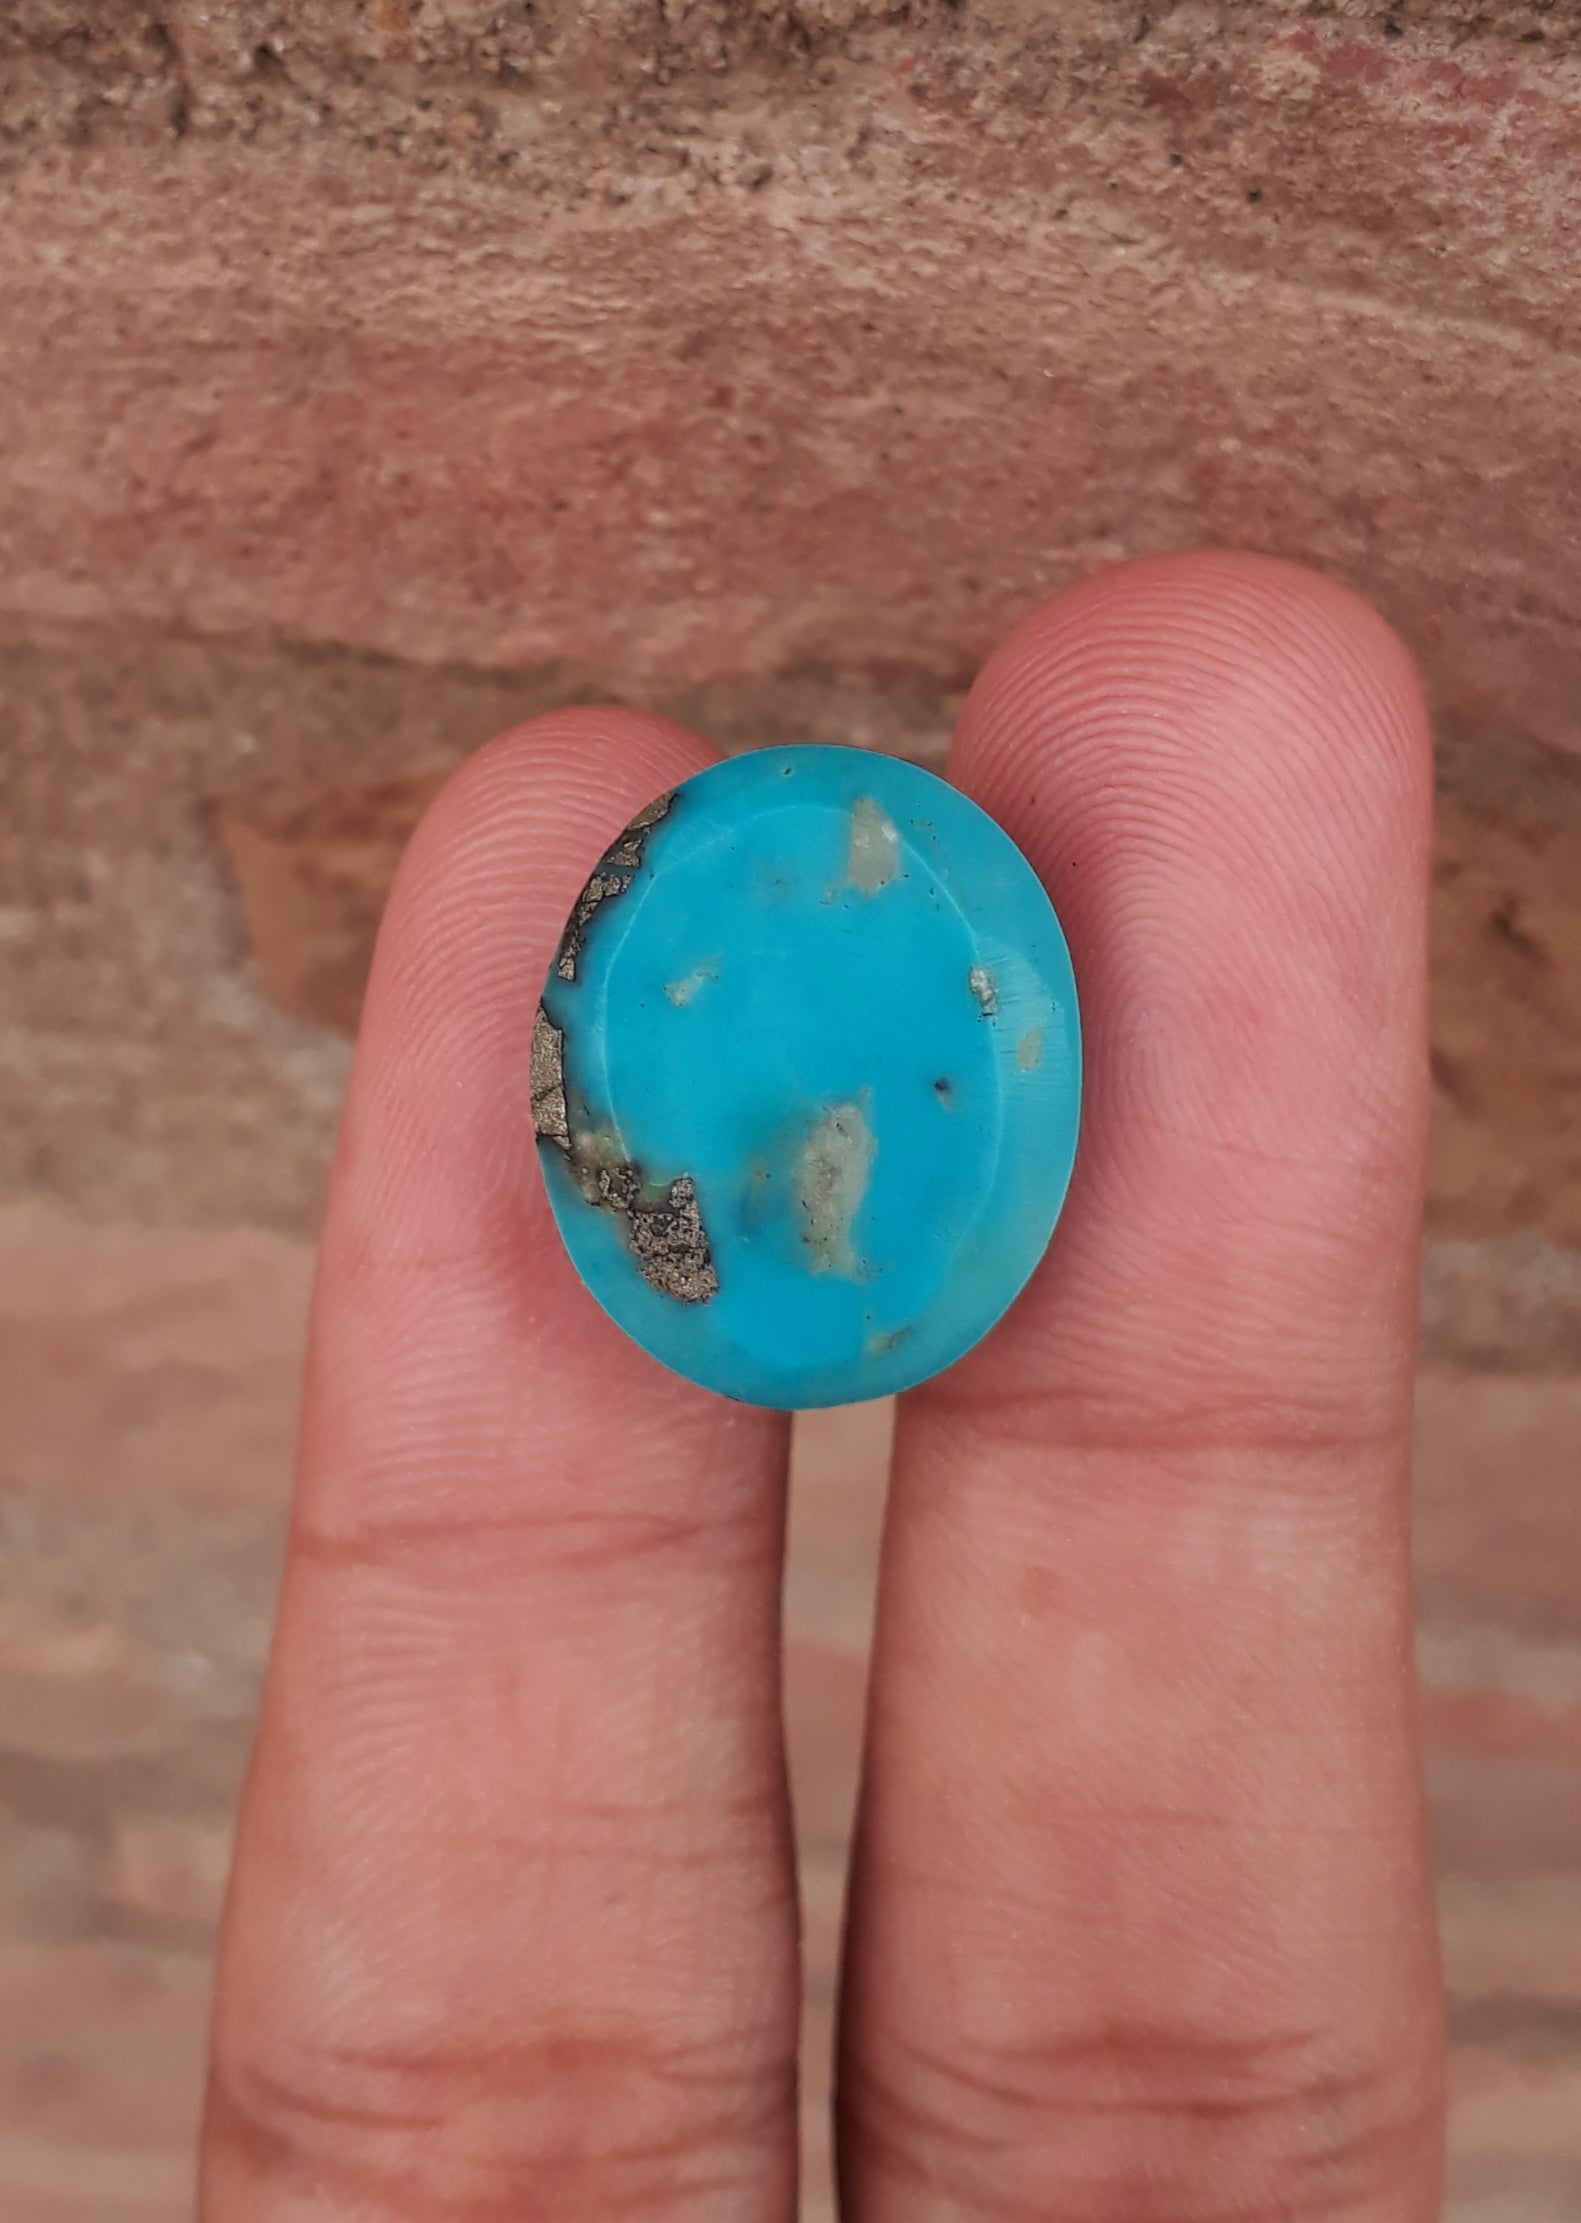 Natural Certified Turquoise with Pyrite - Blue Matrix Turquoise - Shajri Feroza-25.1Ct-20x17mm